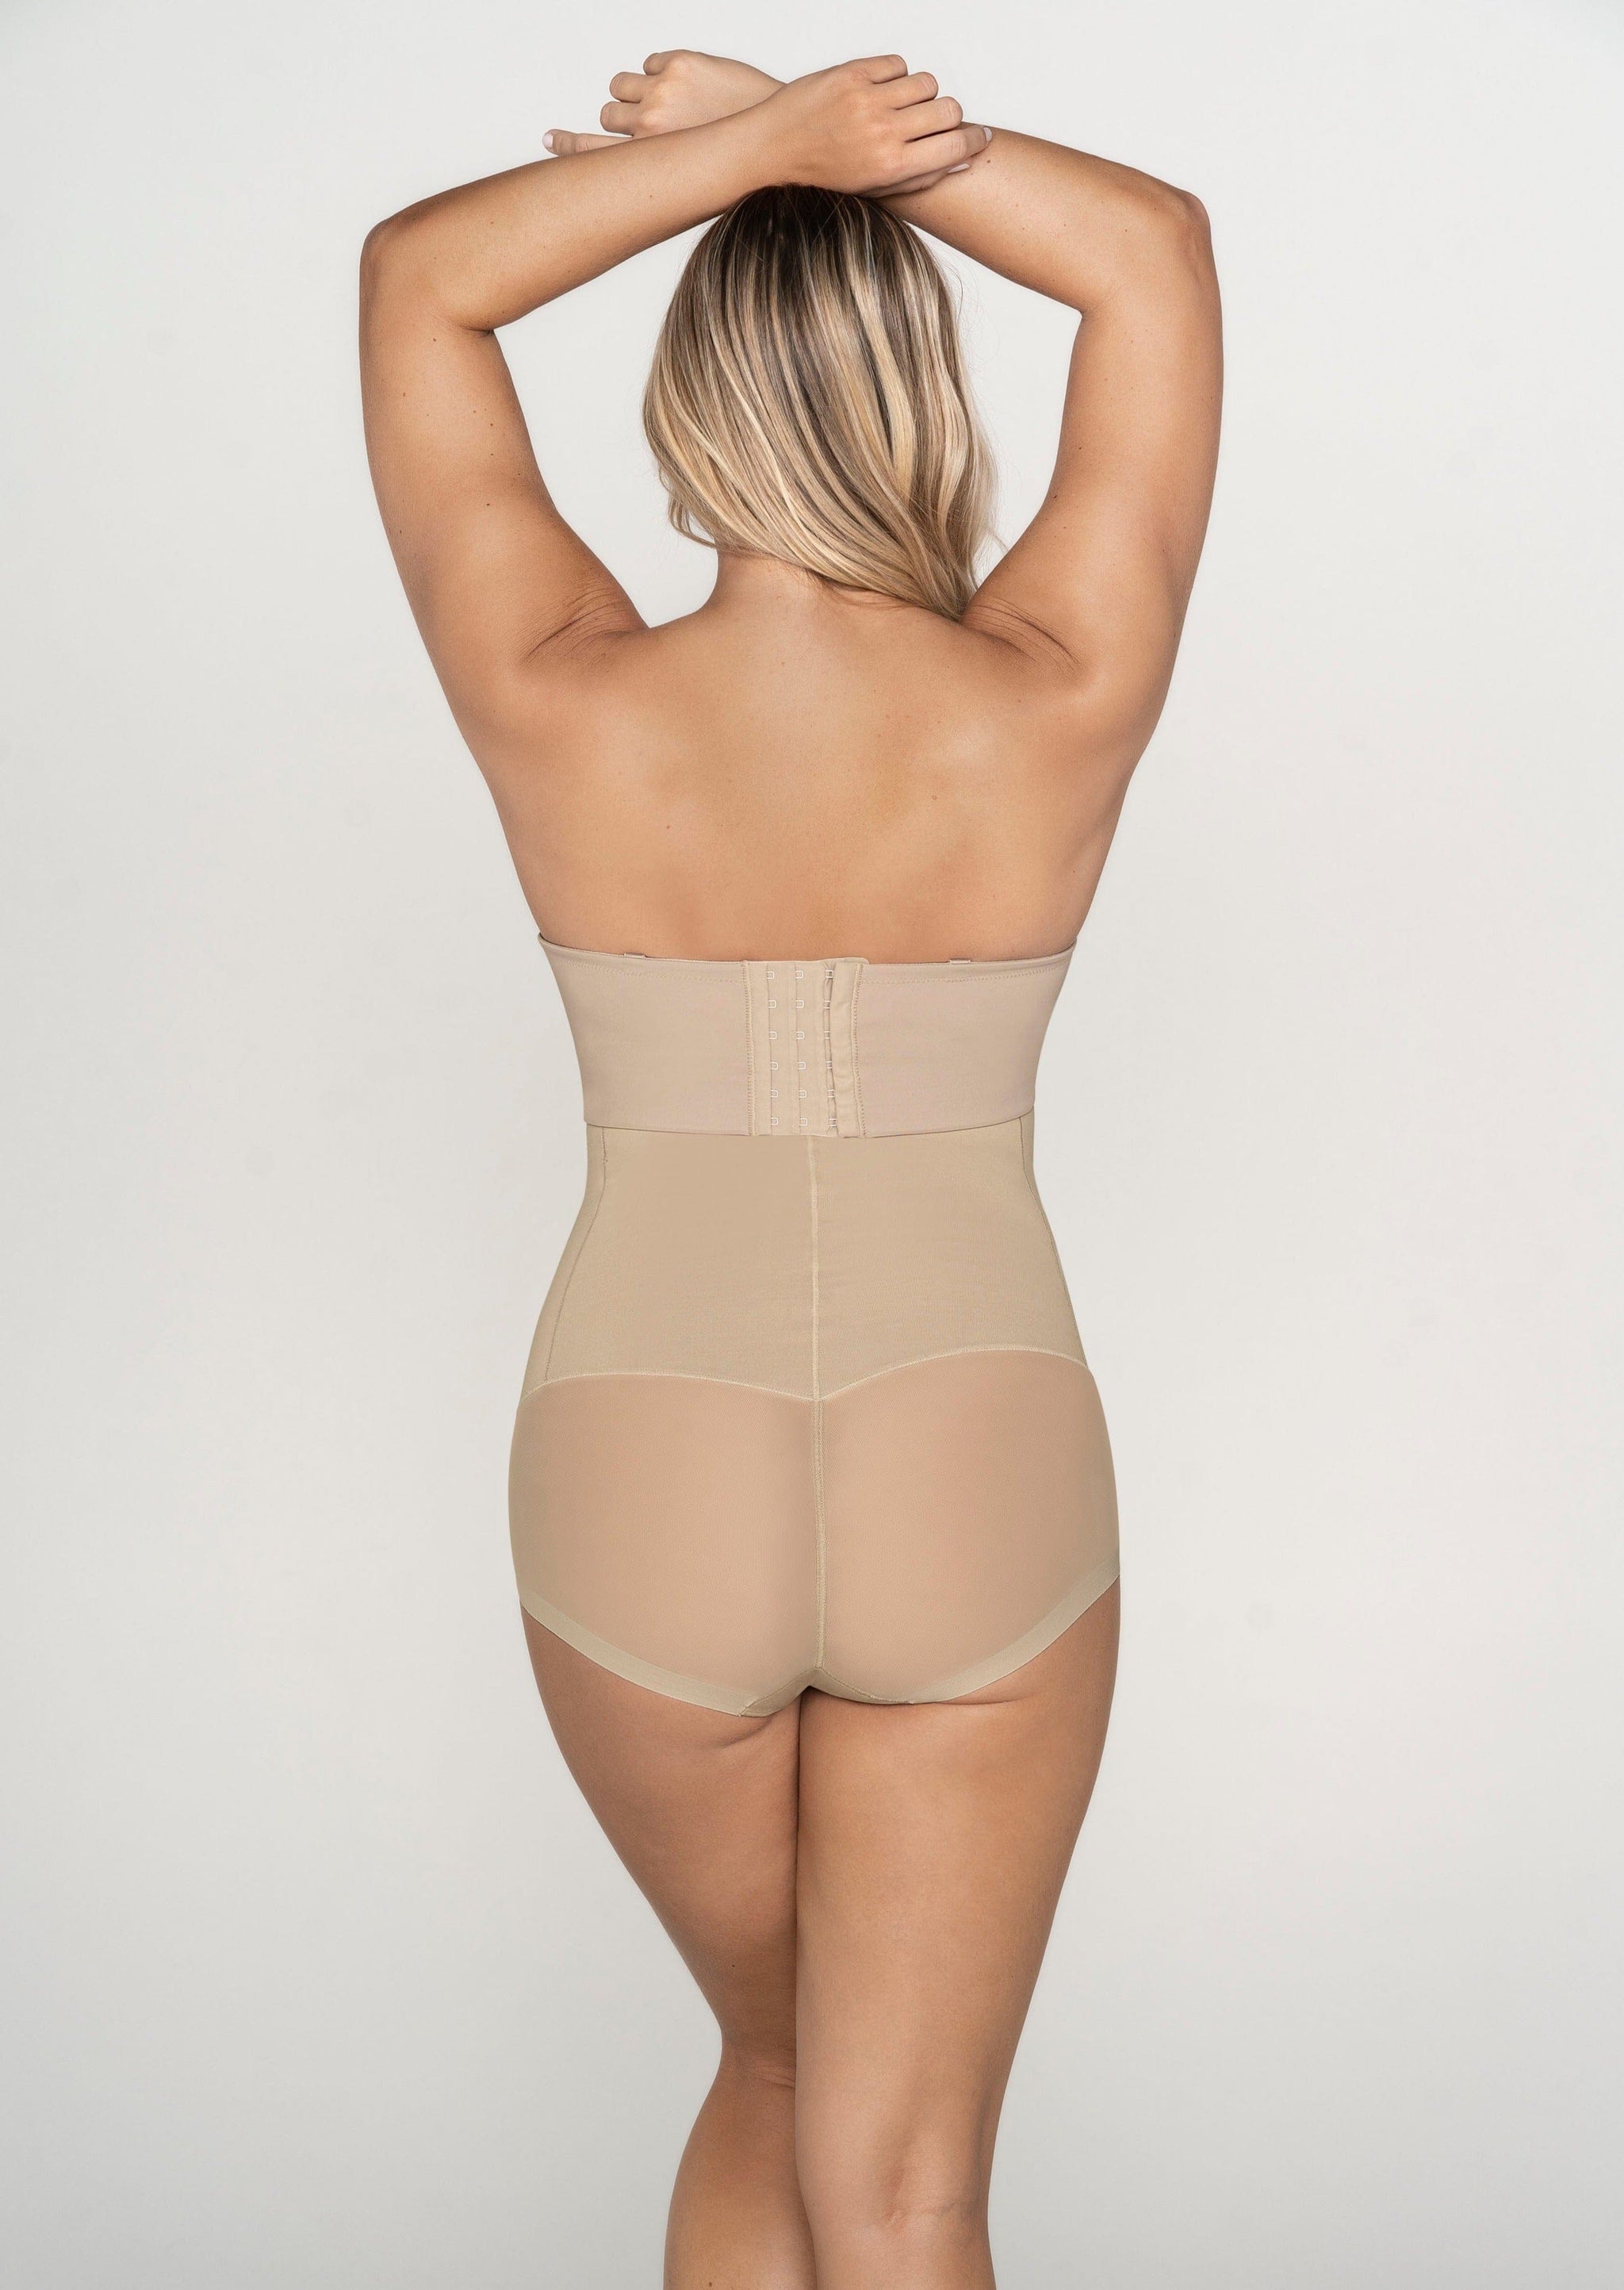 Extra High-Waisted Sheer Bottom Sculpting Shaper Panty - Nude - Chérie Amour